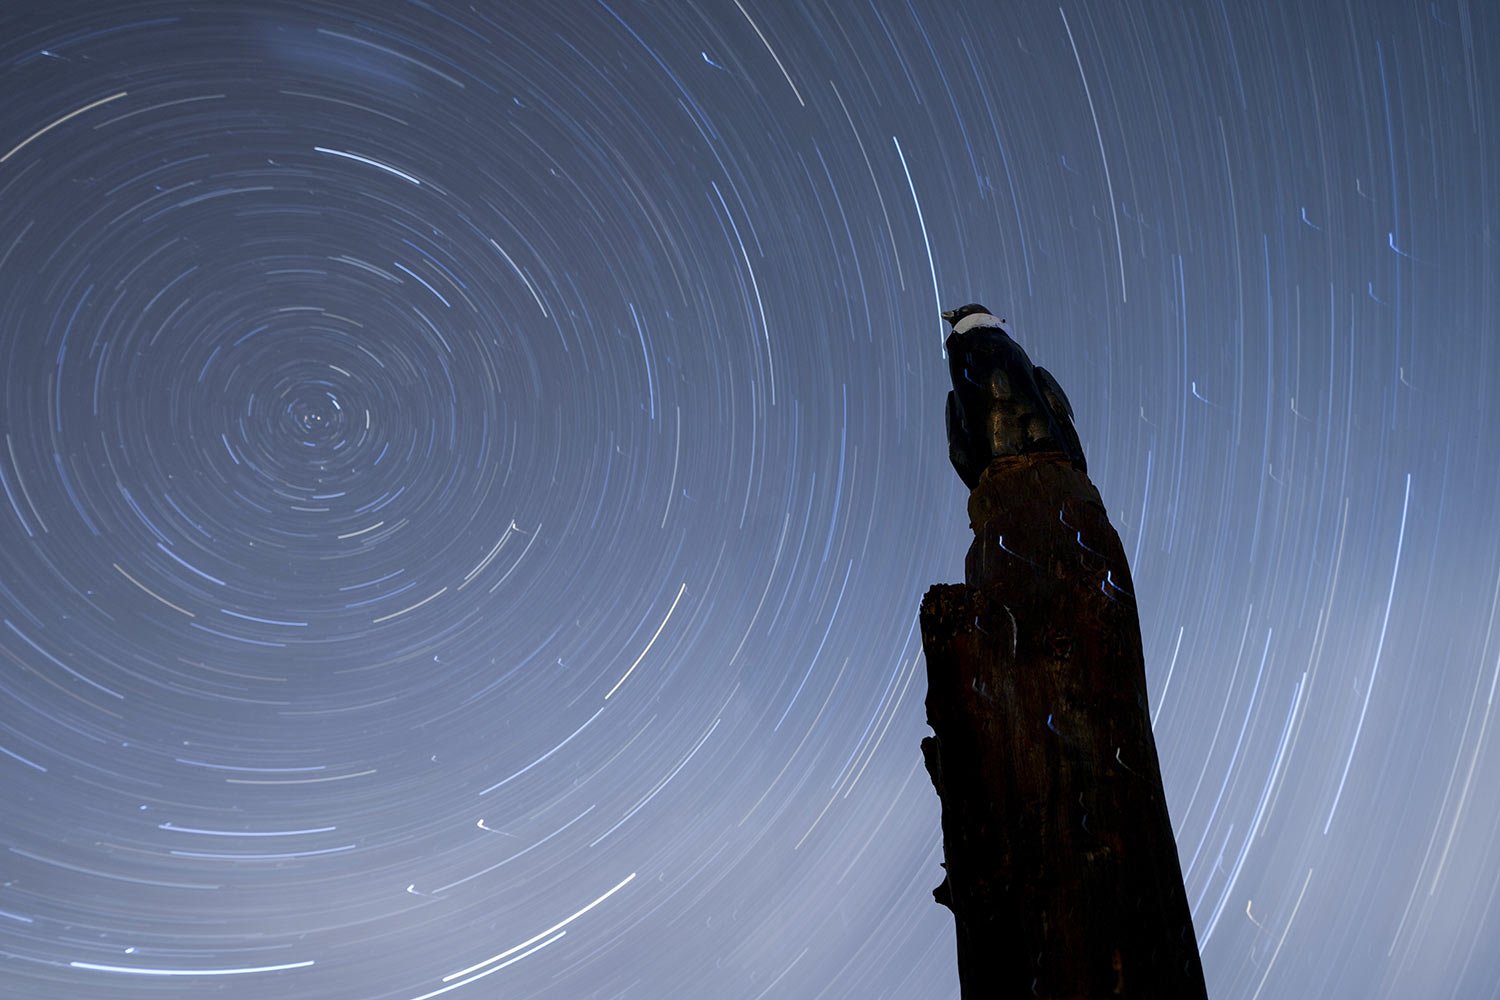  A wooden statue of a condor stands under the stars at the entrance of the base of the Andean Condor Conservation Program in Sierra Paileman in the Rio Negro province of Argentina, Thursday, Oct. 13, 2022. For 30 years the Andean Condor Conservation 